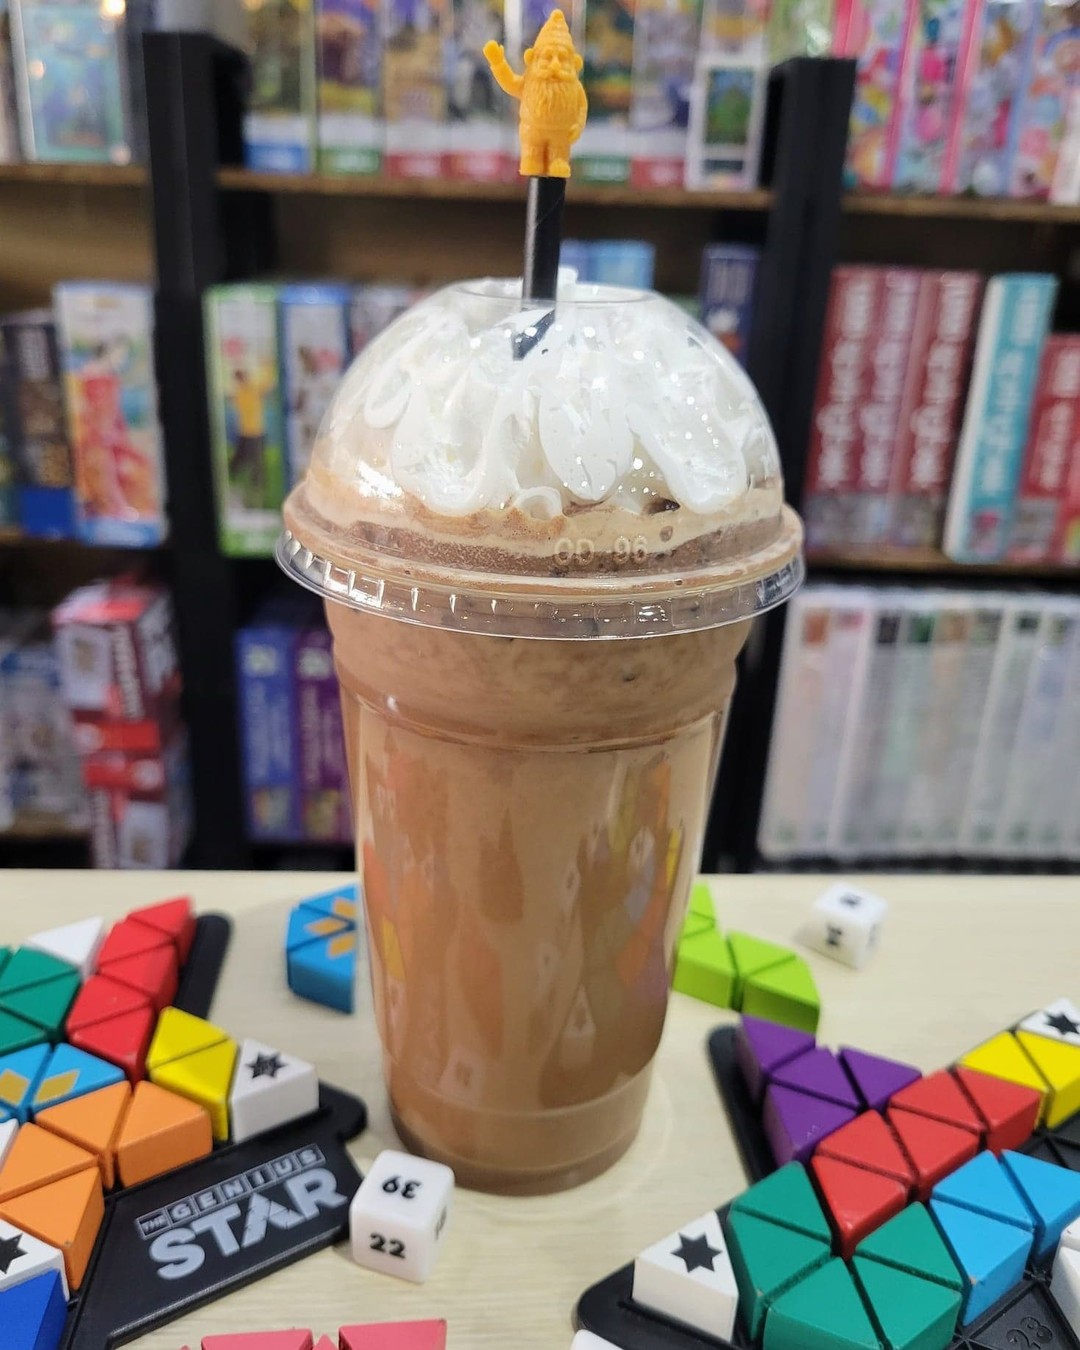 Curse these human sized drinks! I've spend an hour climbing this mountain of a coffee, relished in it's taste, only to realized that I am afraid of heights and unable to get down. At least I can continue to drink my delicious Iced Banana Mocha! 

#gnoshery #gnomegames #coffee #tea #latte #gnoshgnosh